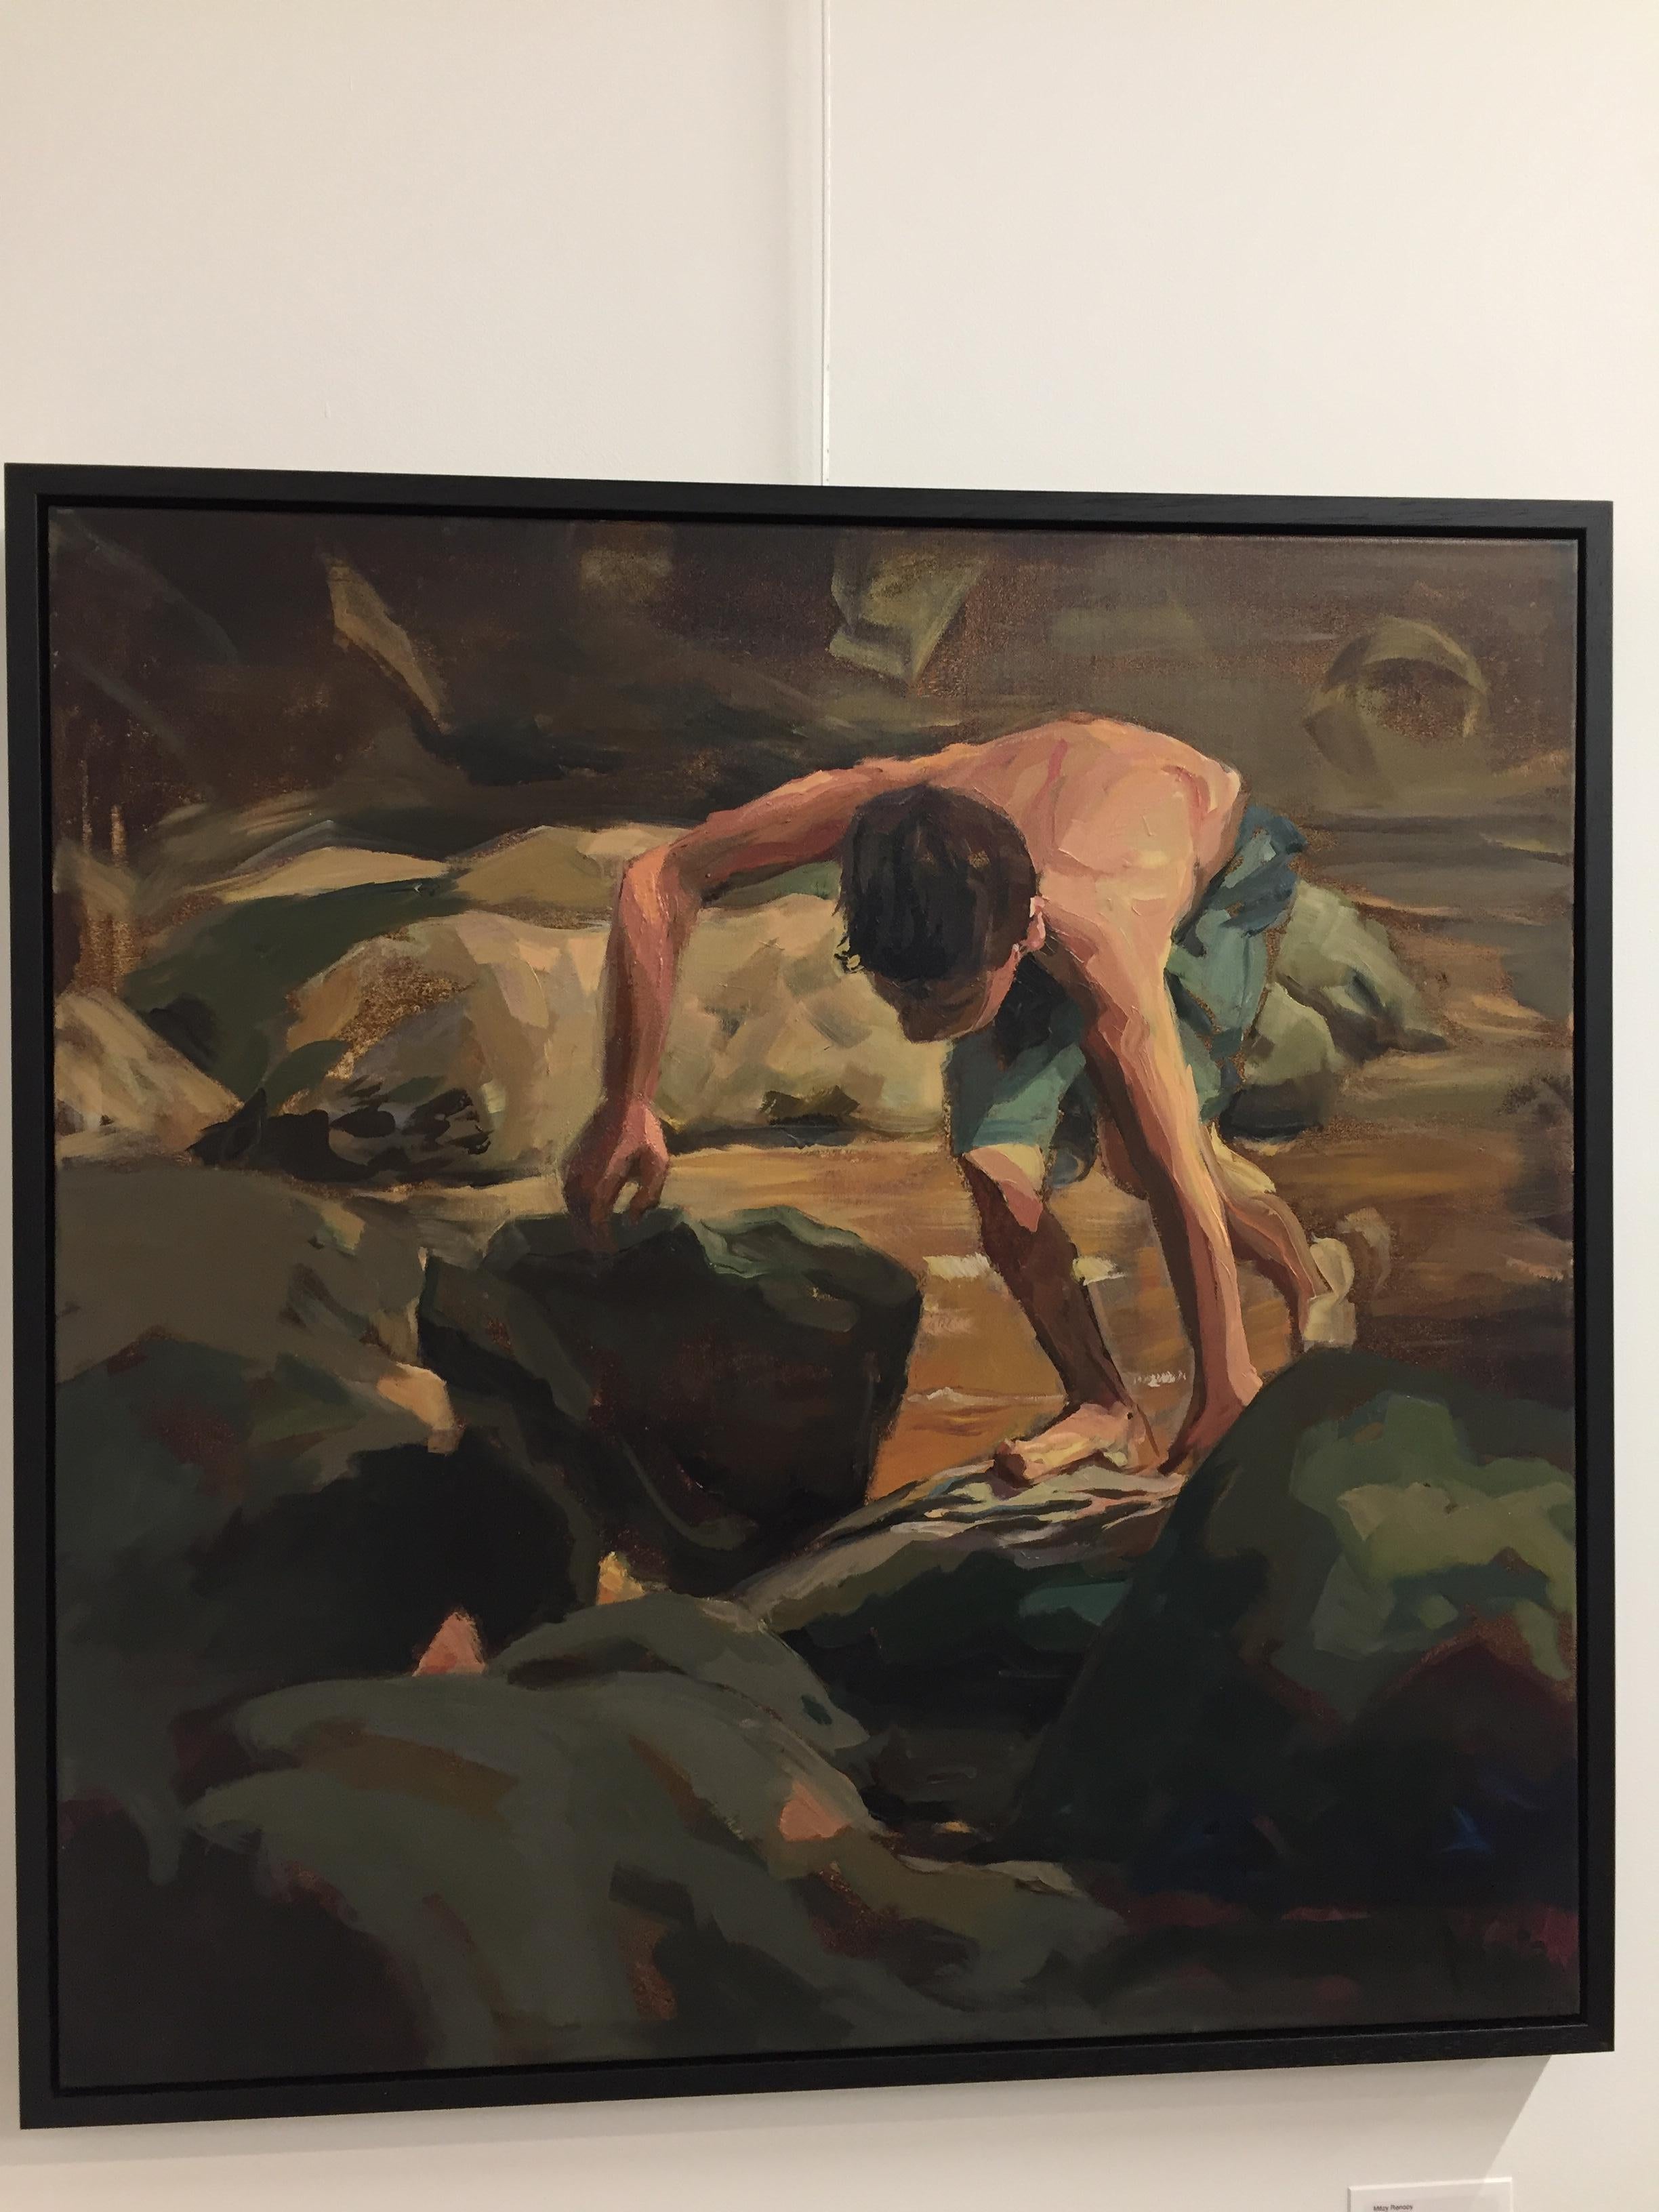 Mitzy Renooy made this painting in the summer of 2018. She is always looking for light and composition to show. This time a young boy playing in the water, on the rocks.  The artist likes to give an impression of movement. Mitzy Renooy finds her